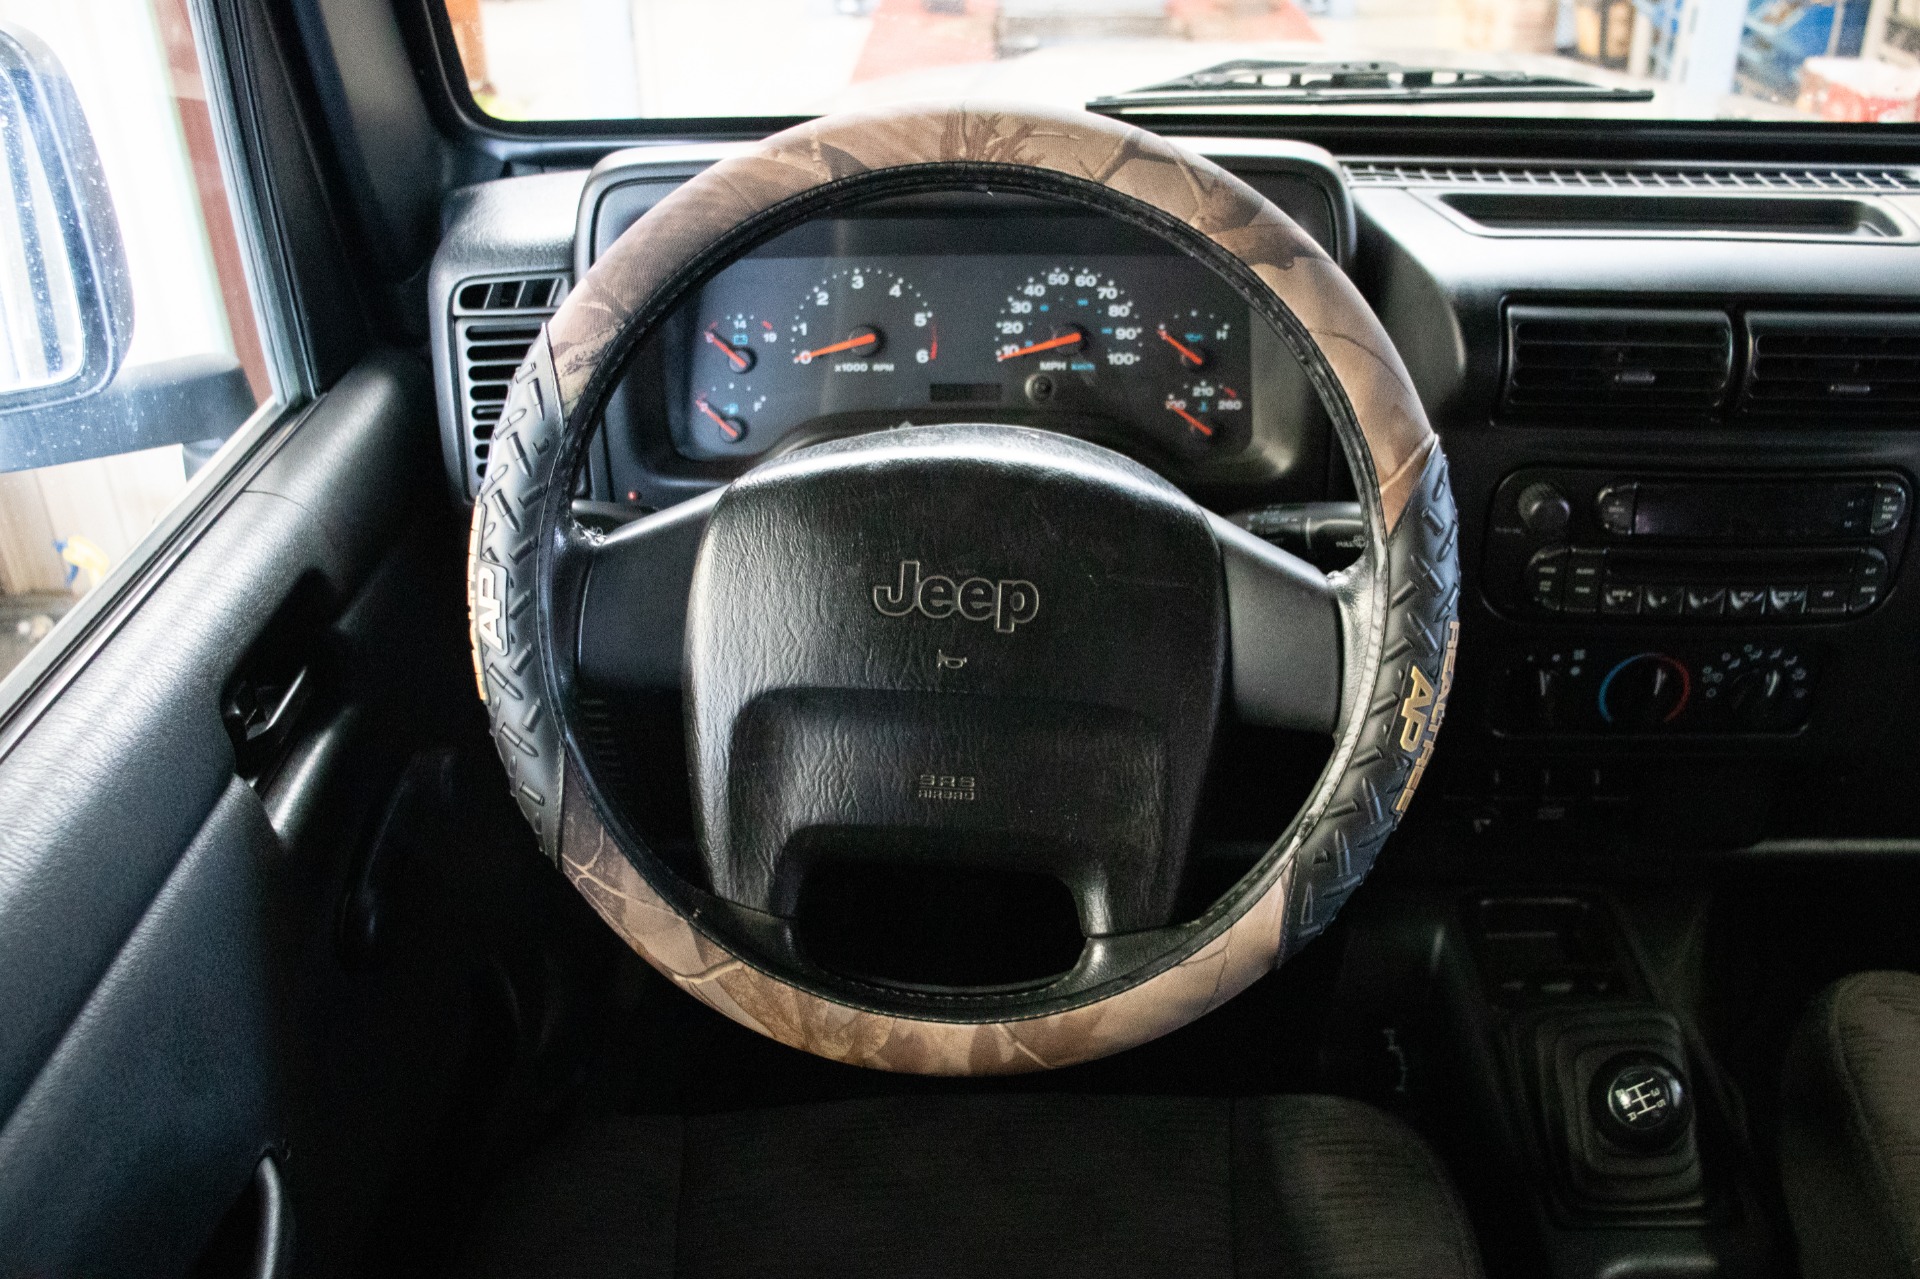 Used 2003 Jeep Wrangler Sport For Sale ($12,995) | Select Jeeps Inc. Stock  #350910